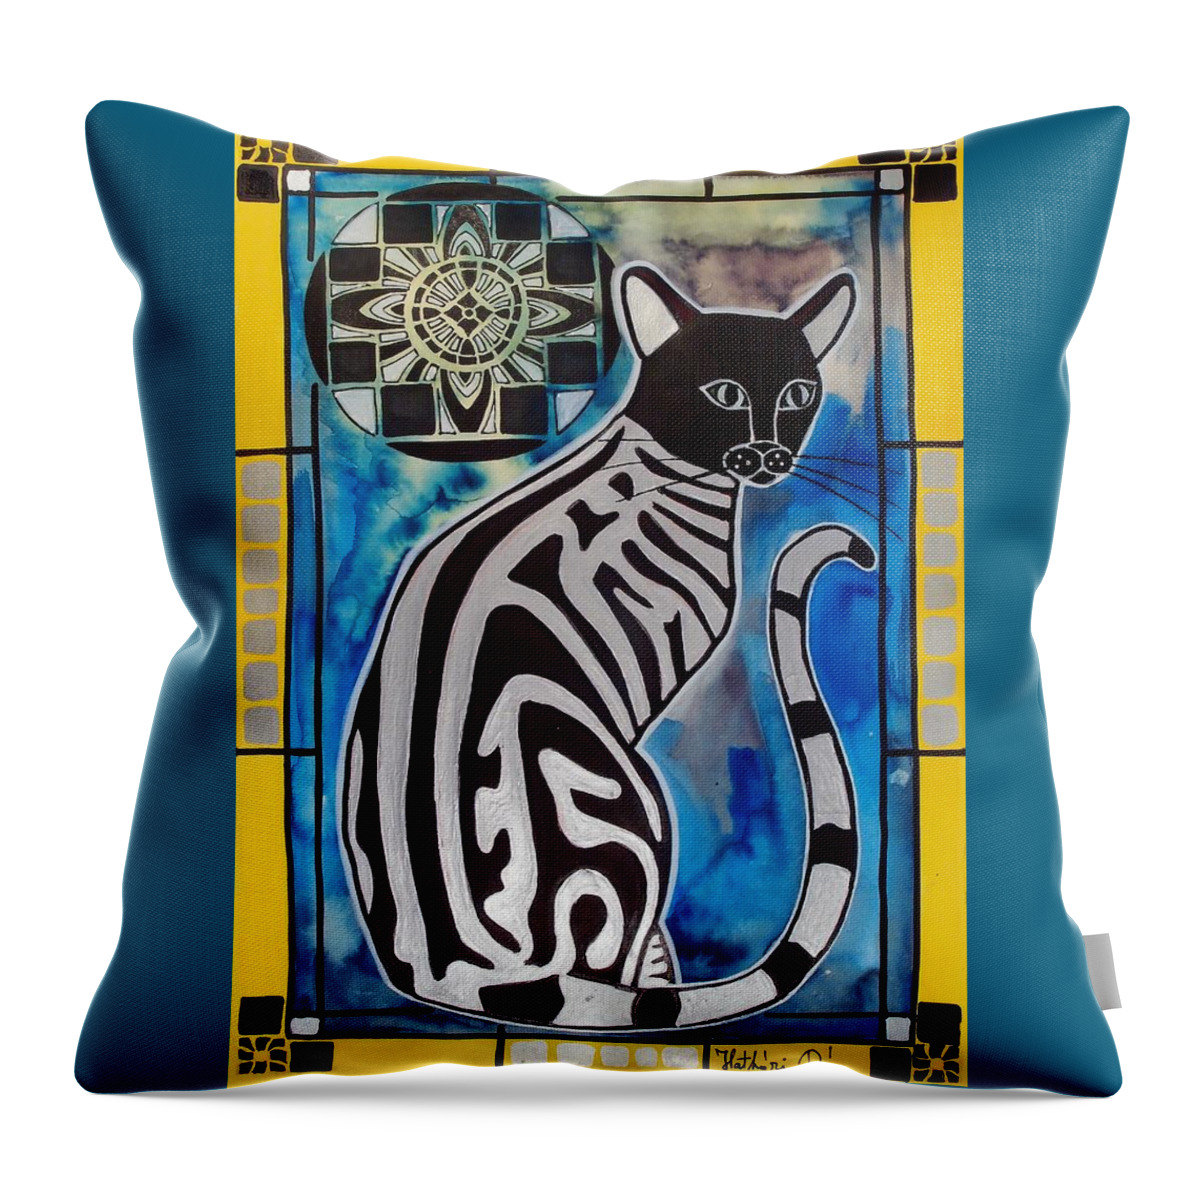 Cats Throw Pillow featuring the painting Silver Tabby with Mandala - Cat Art by Dora Hathazi Mendes by Dora Hathazi Mendes